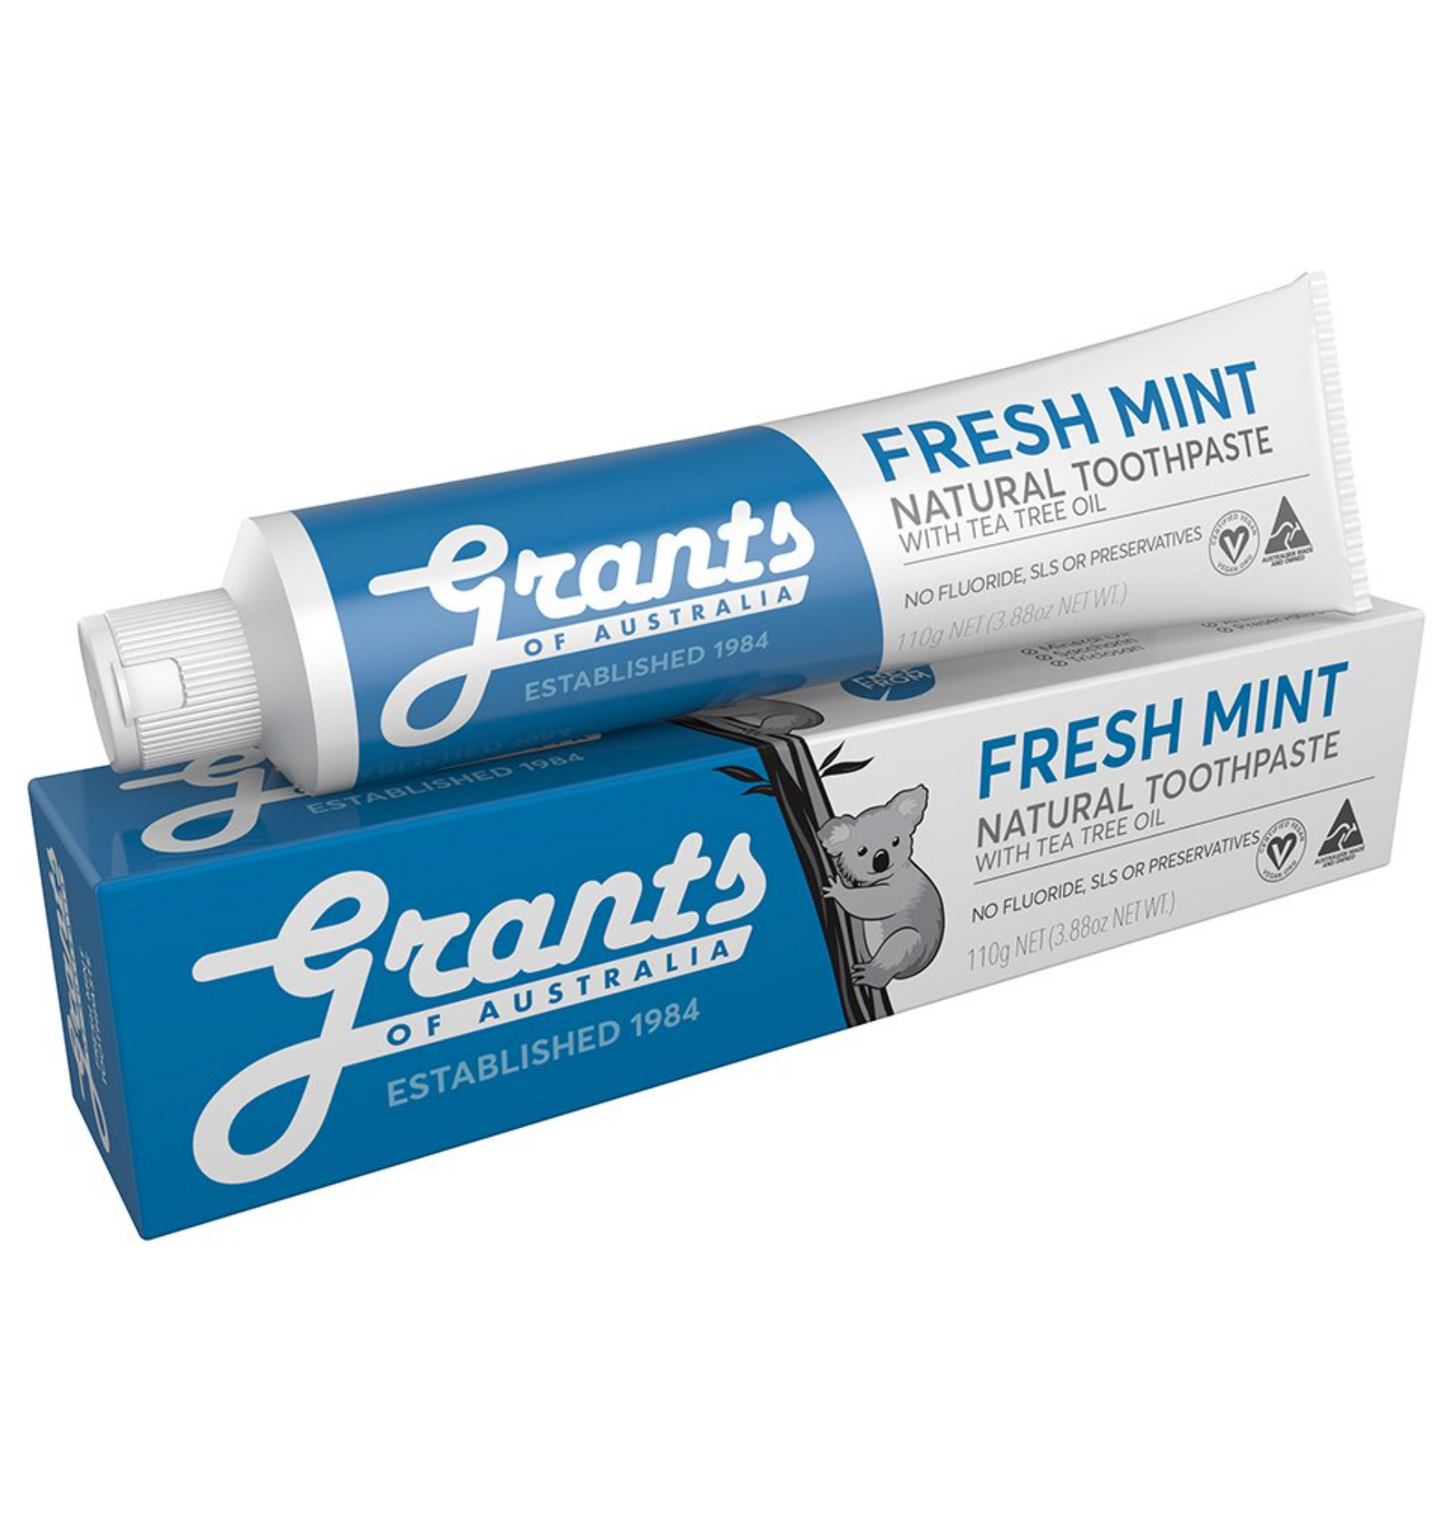 Grants Natural Toothpaste 25g Or 110g, Fresh Mint With Tea Tree Oil, Fluoride Free